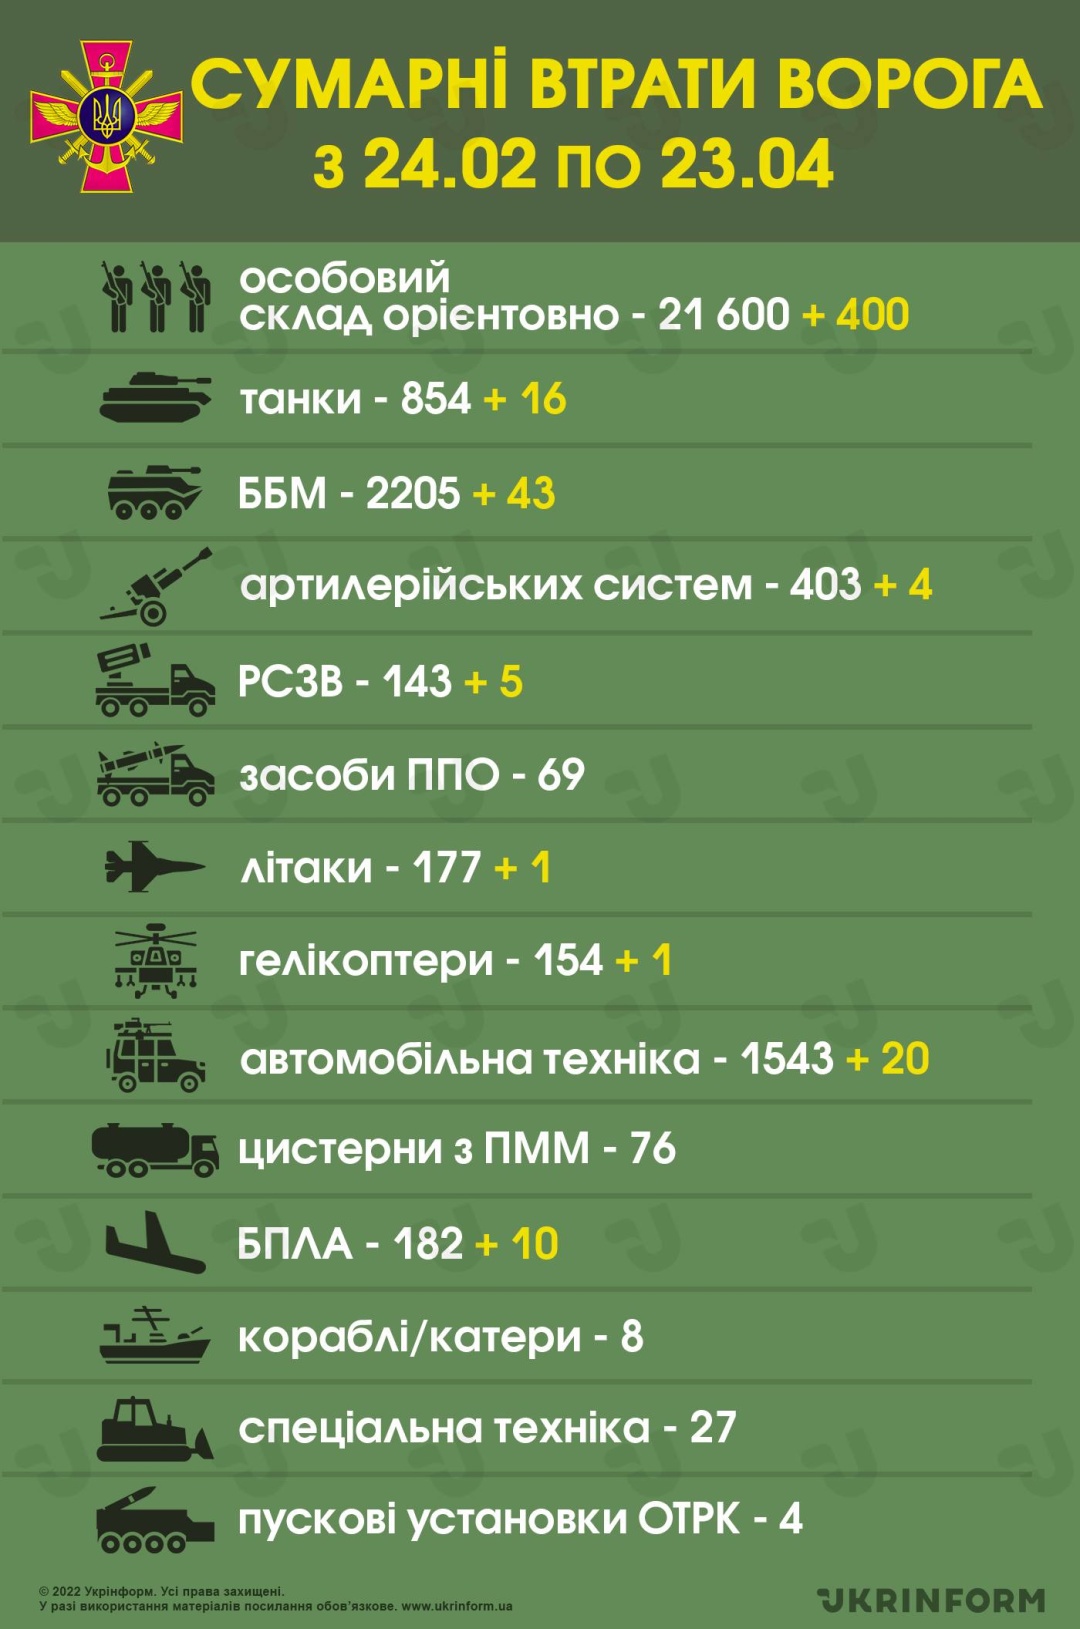 General Staff updated Combat losses of Russian troops - 21,600